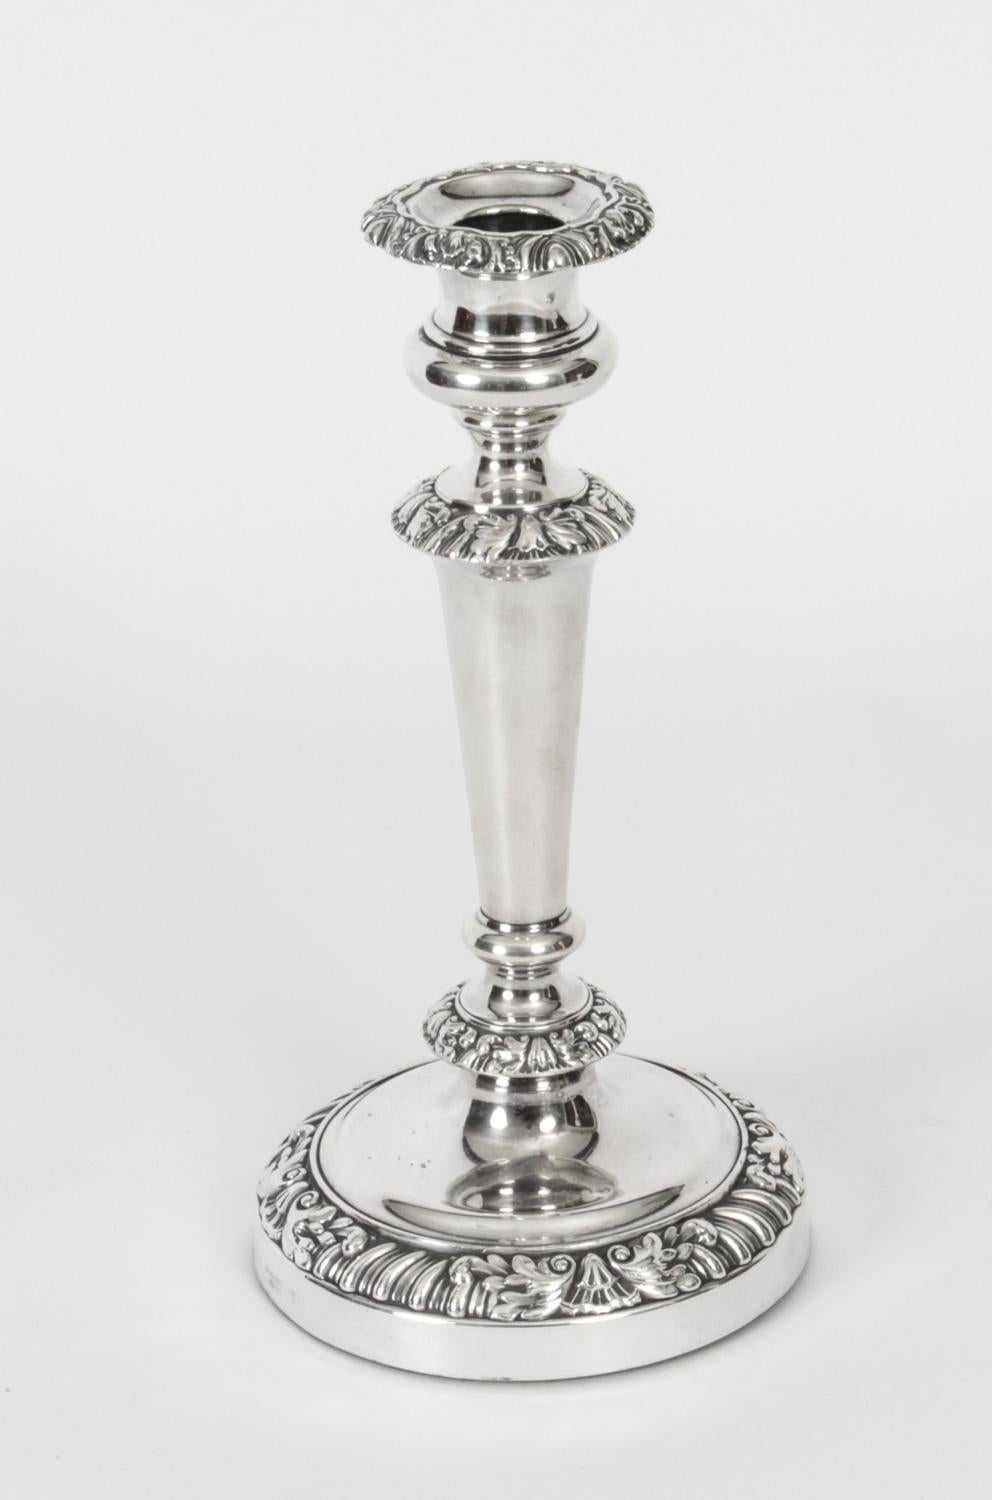 This is an elegant pair of antique English Georgian Old Sheffields silver plated candlesticks bearing the the makers mark D & G Holy, Sheffield, circa 1820 in date.
 
The pair features a richly decorated rocaille pattern with a tapering shaft and